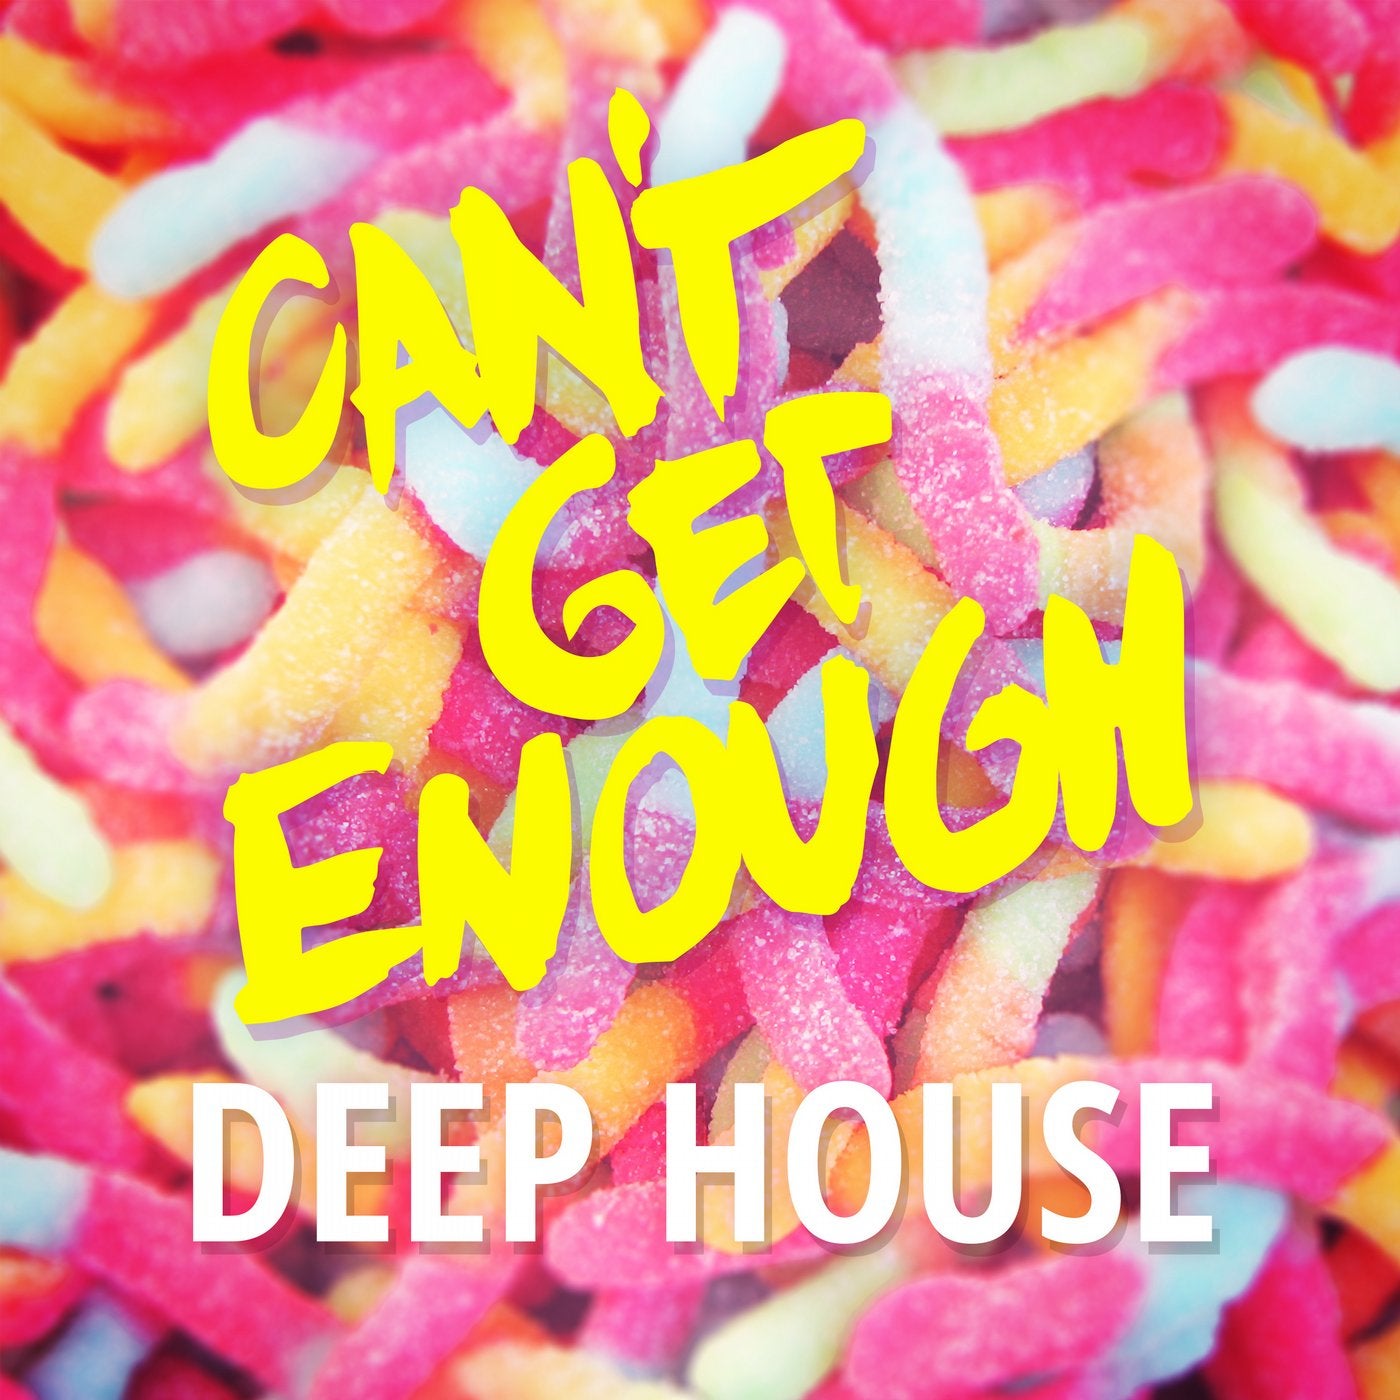 Can't Get Enough Deep House